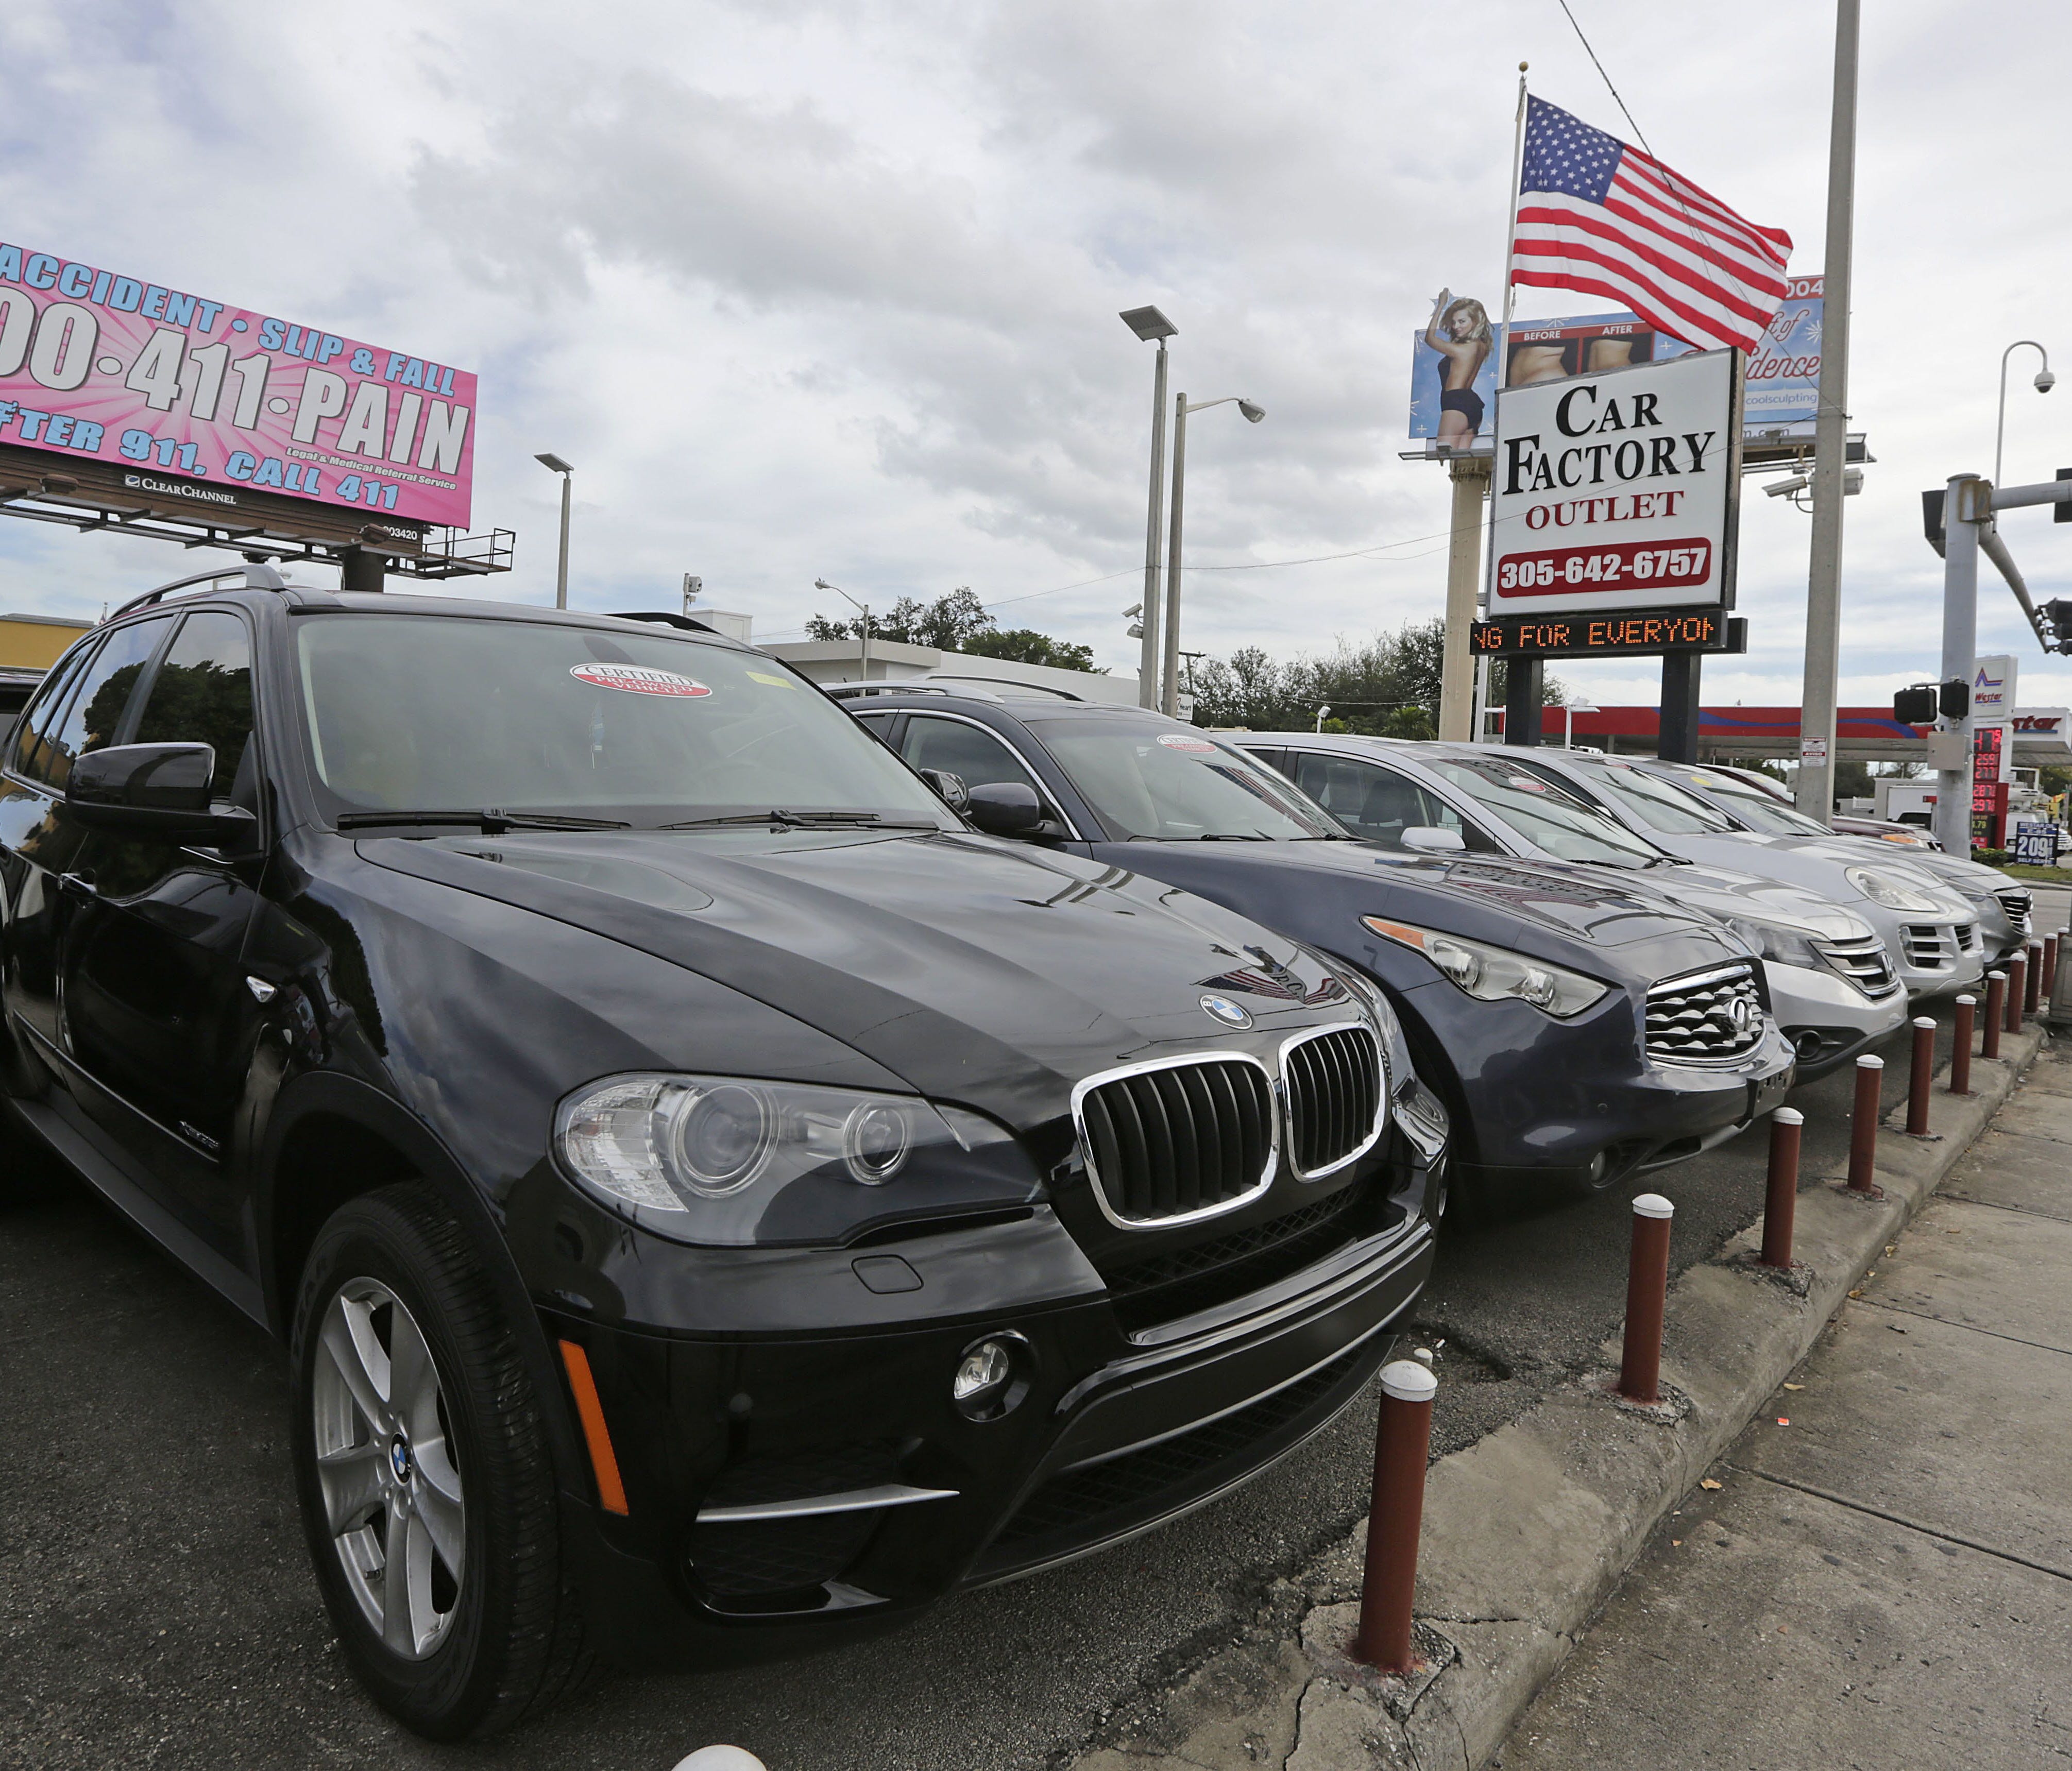 Certified pre-owned vehicles sit on display at an auto dealership in Miami. A certified pre-owned vehicle costs more than a regular used car, but it can give buyers some peace of mind in an often murky market. Certified pre-owned vehicles are used ca